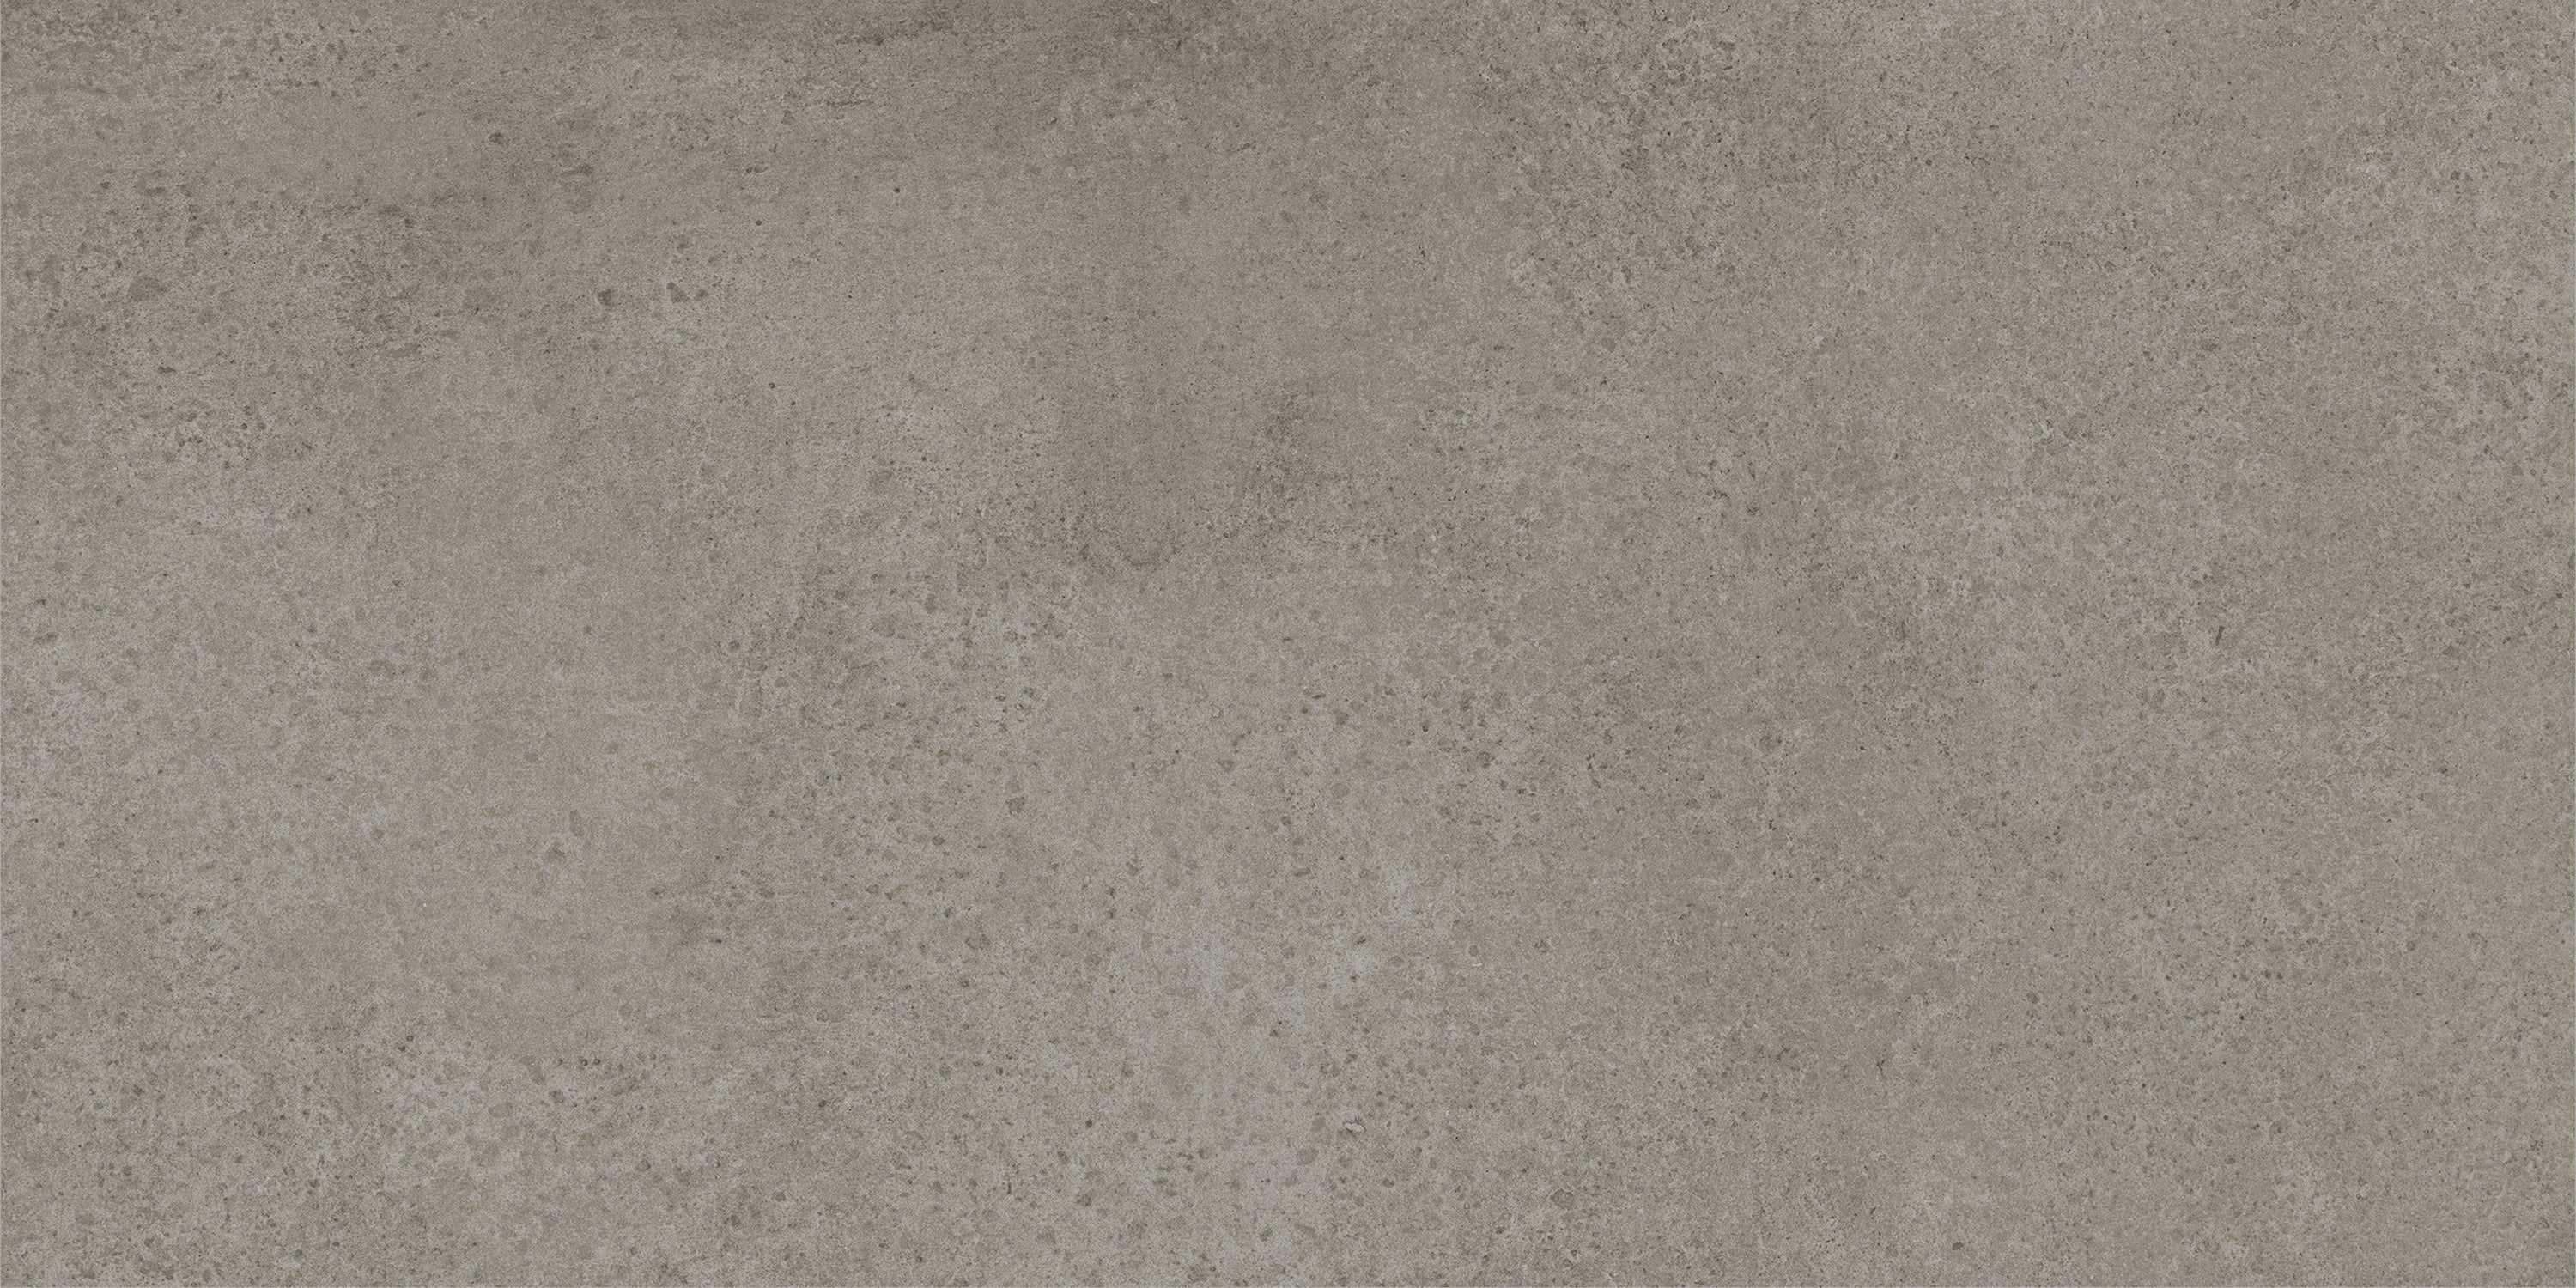 landmark 9mm madein vision grey field tile 12x24x9mm grip rectified porcelain tile distributed by surface group international